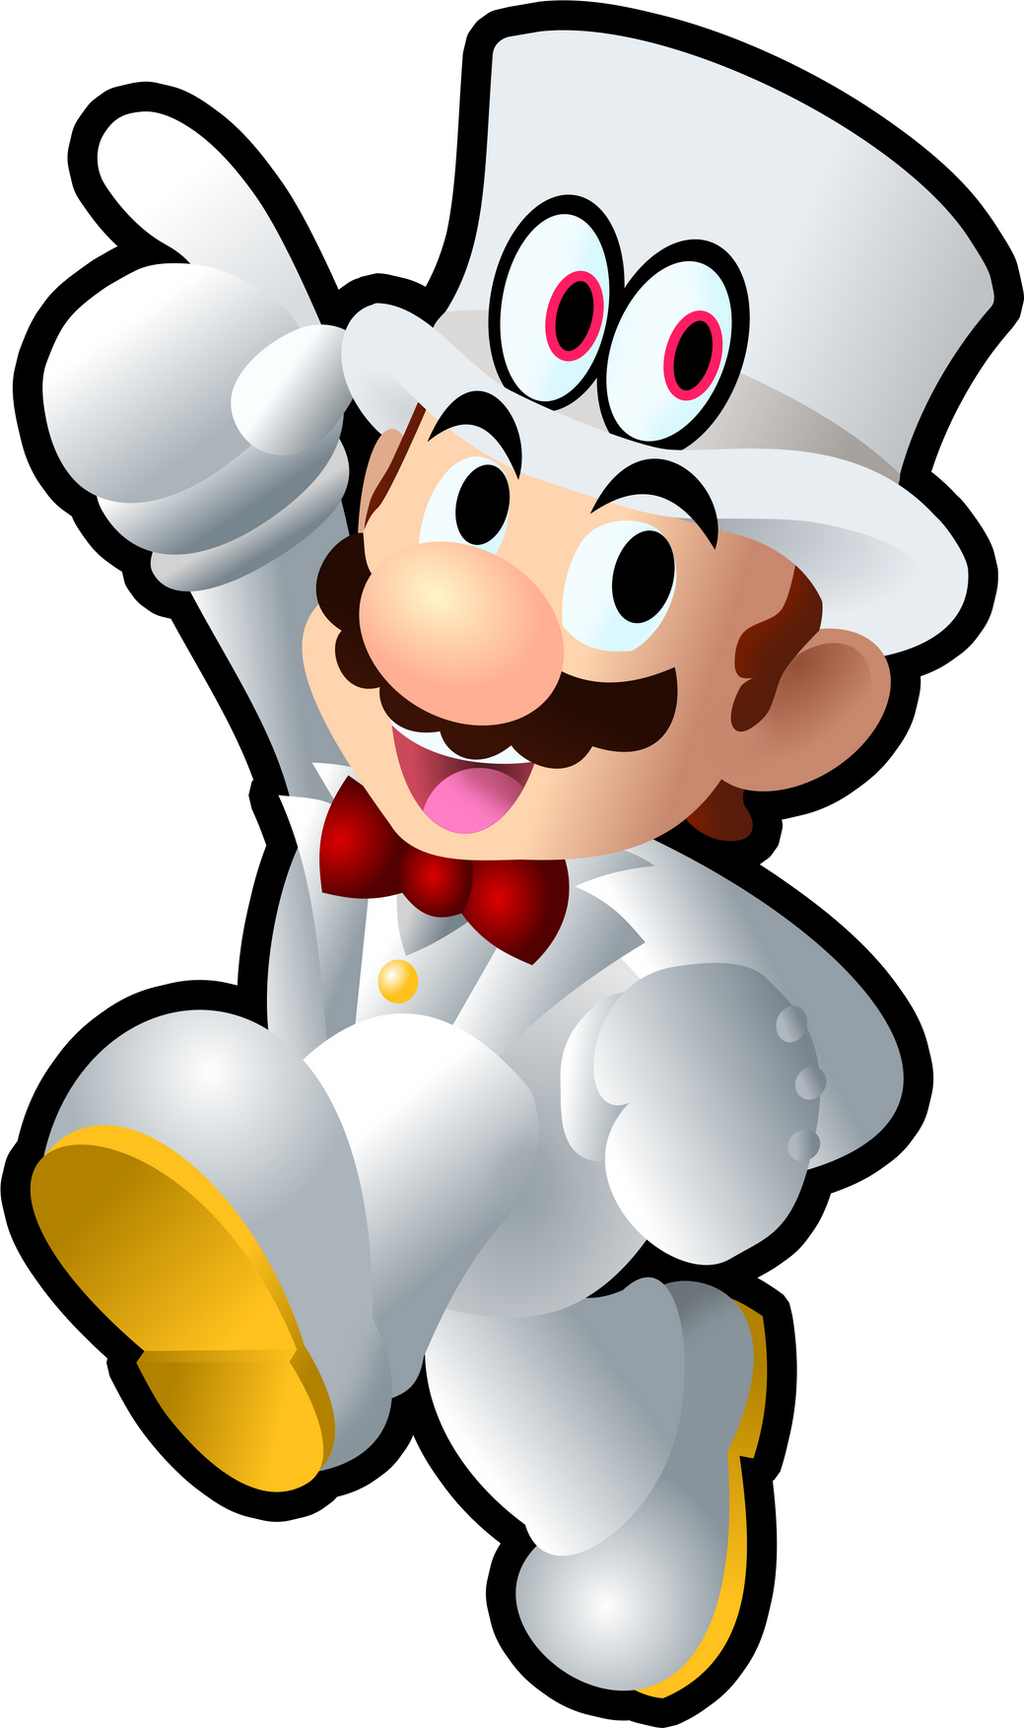 mario_s_odyssey_by_fawfulthegreat64-dbqrucf.png